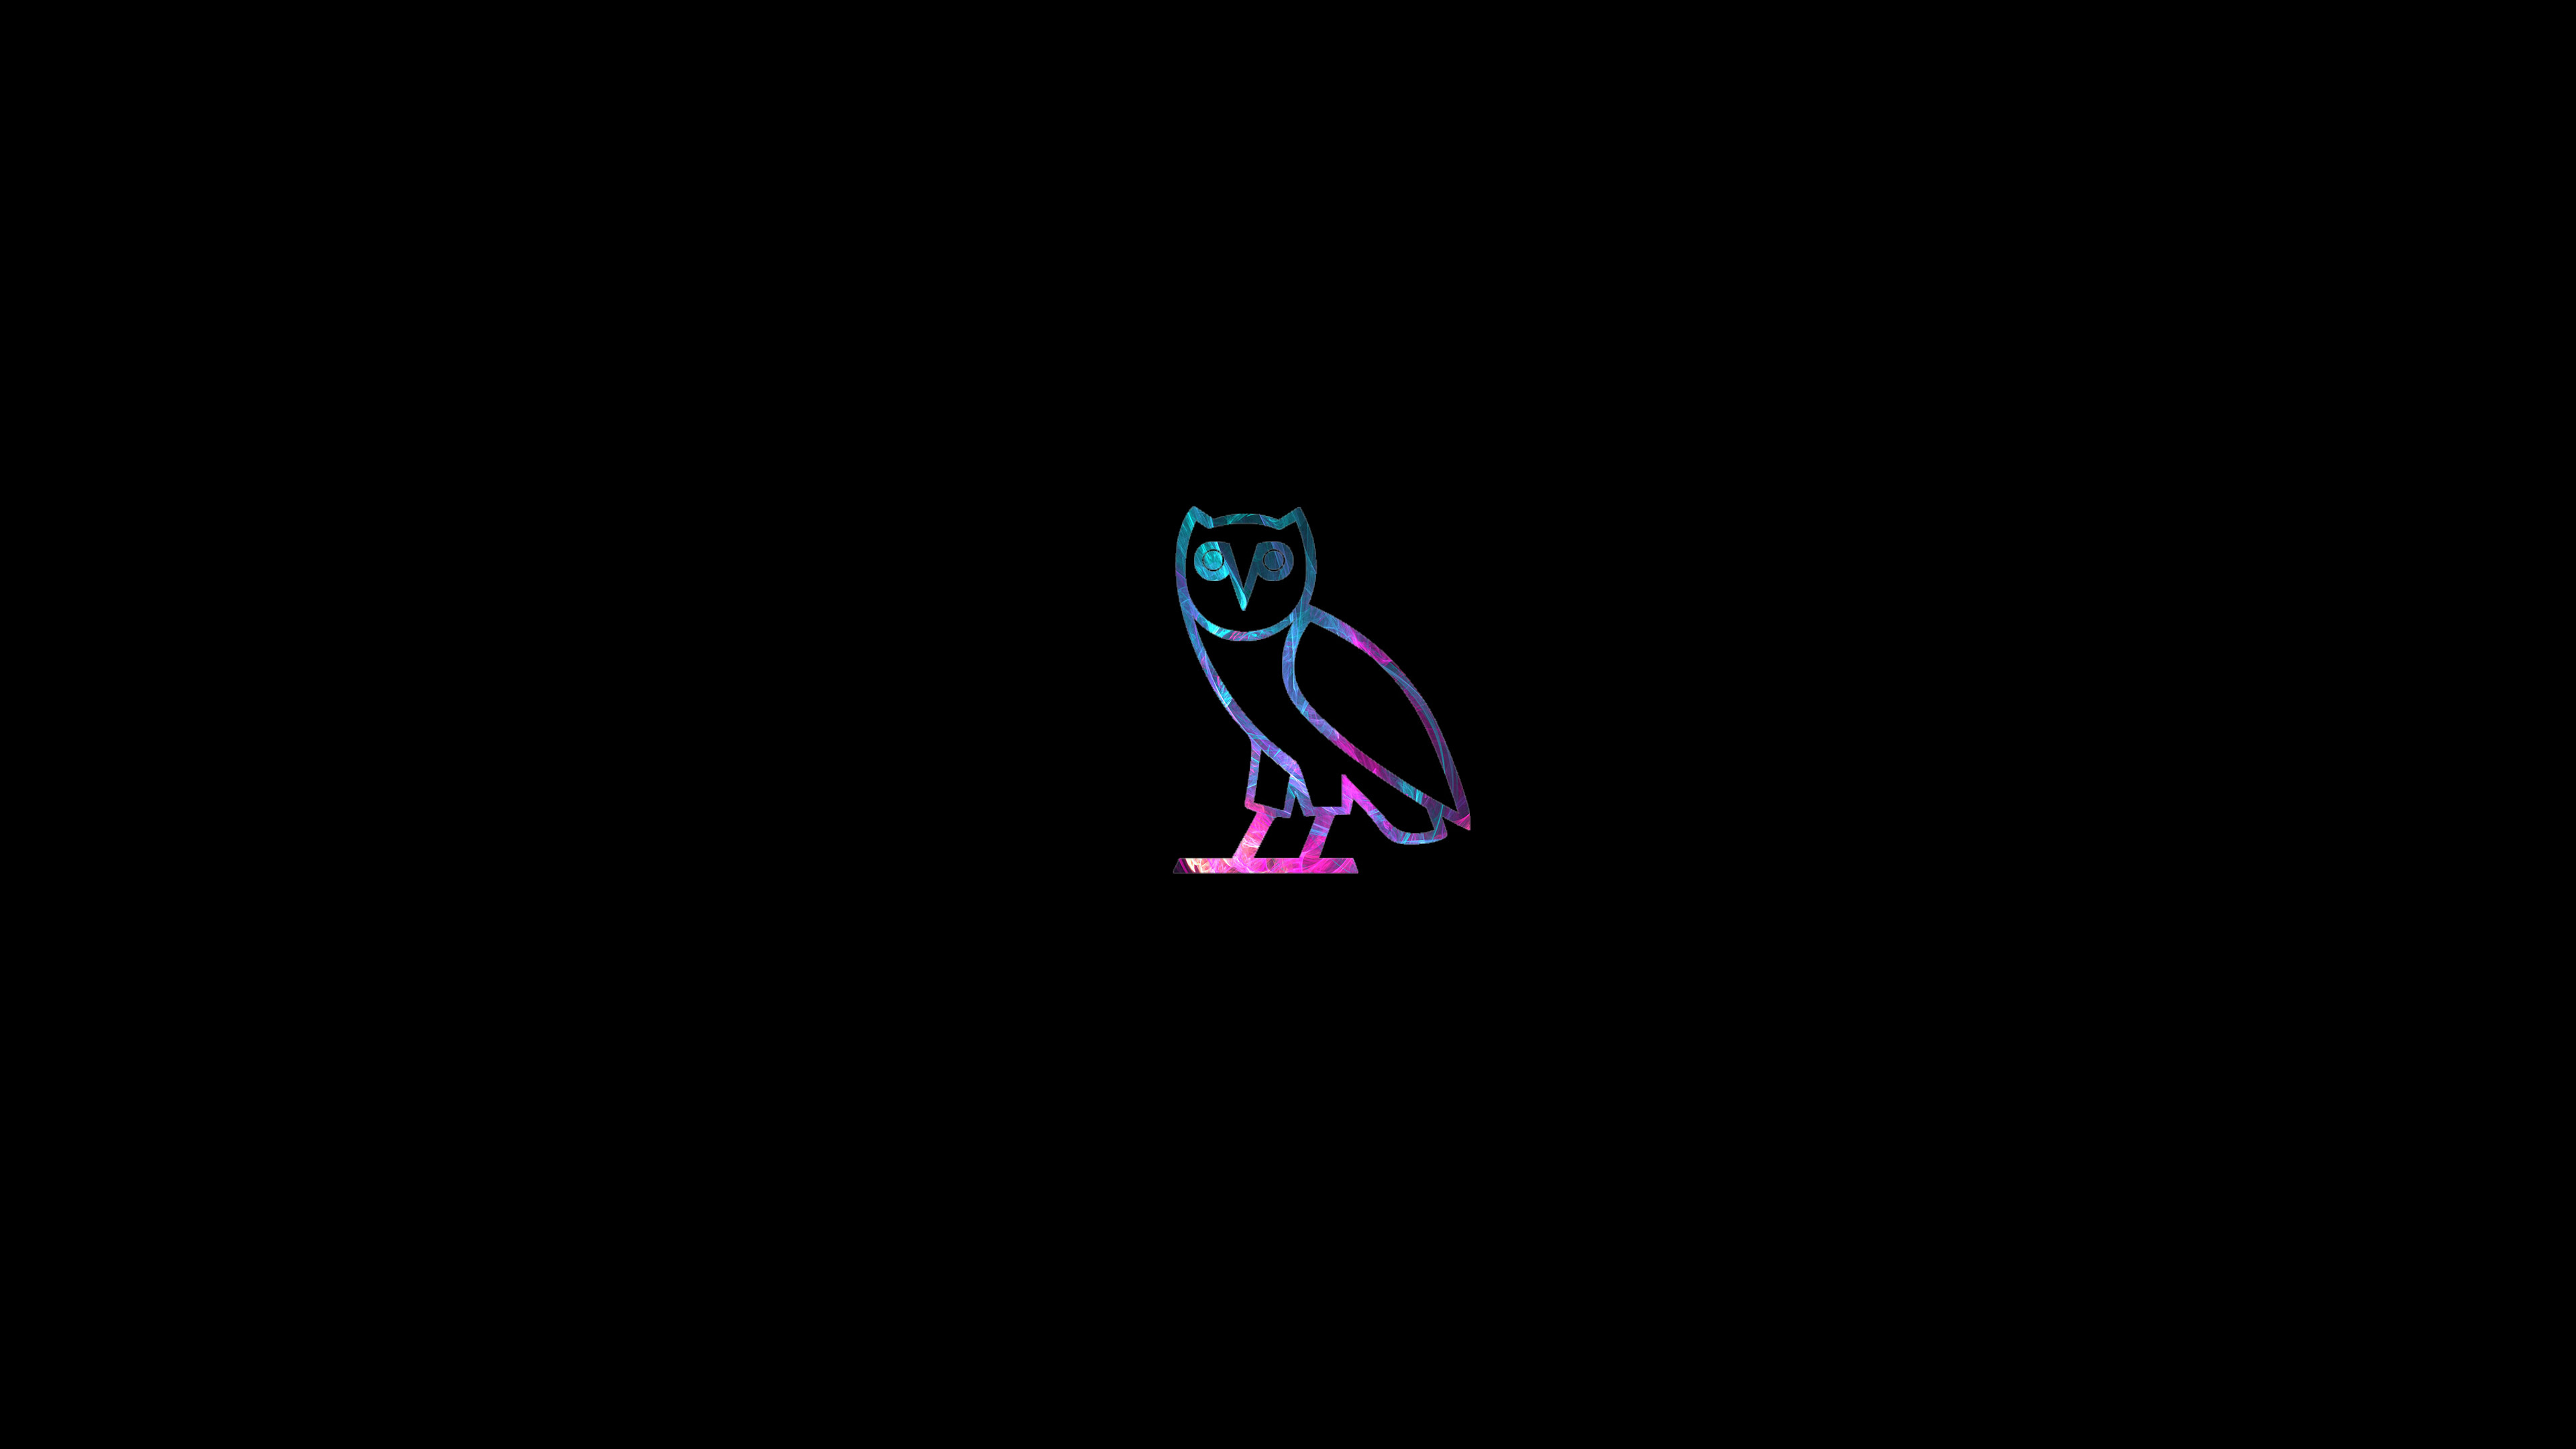 Ovo Wallpapers HD, Desktop Backgrounds, Images and